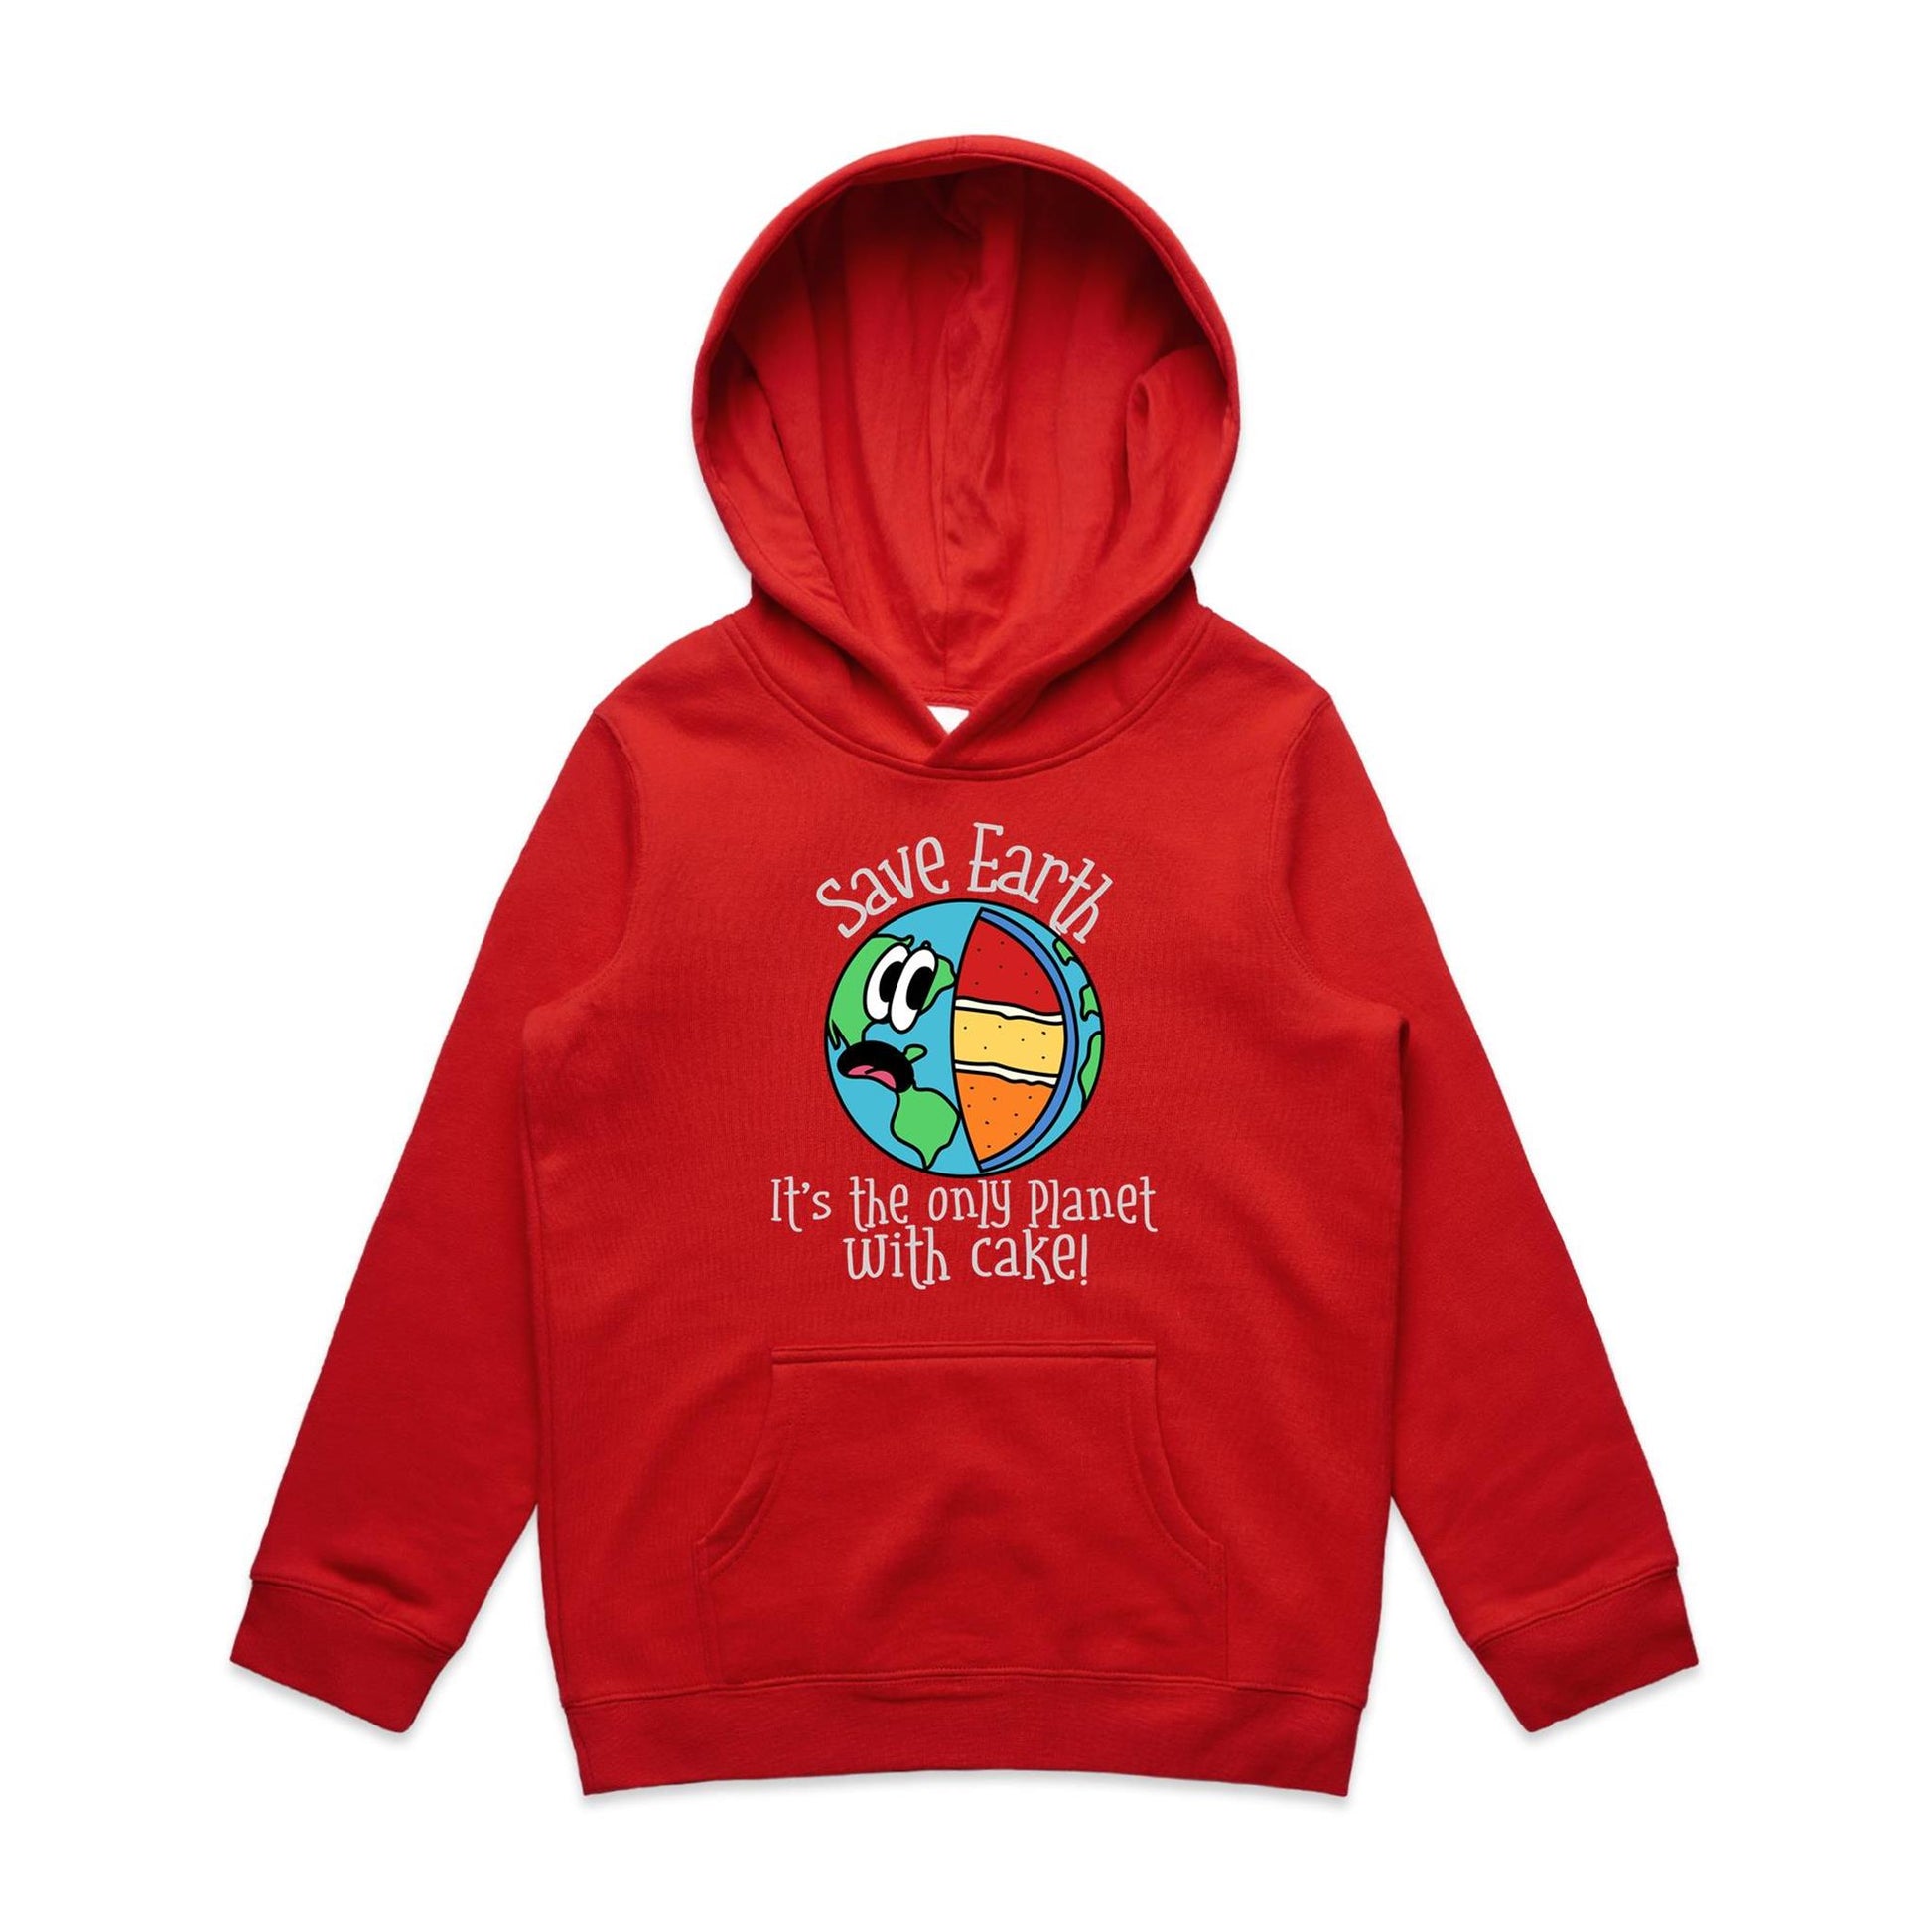 Save Earth, It's The Only Planet With Cake - Youth Supply Hood Red Kids Hoodie